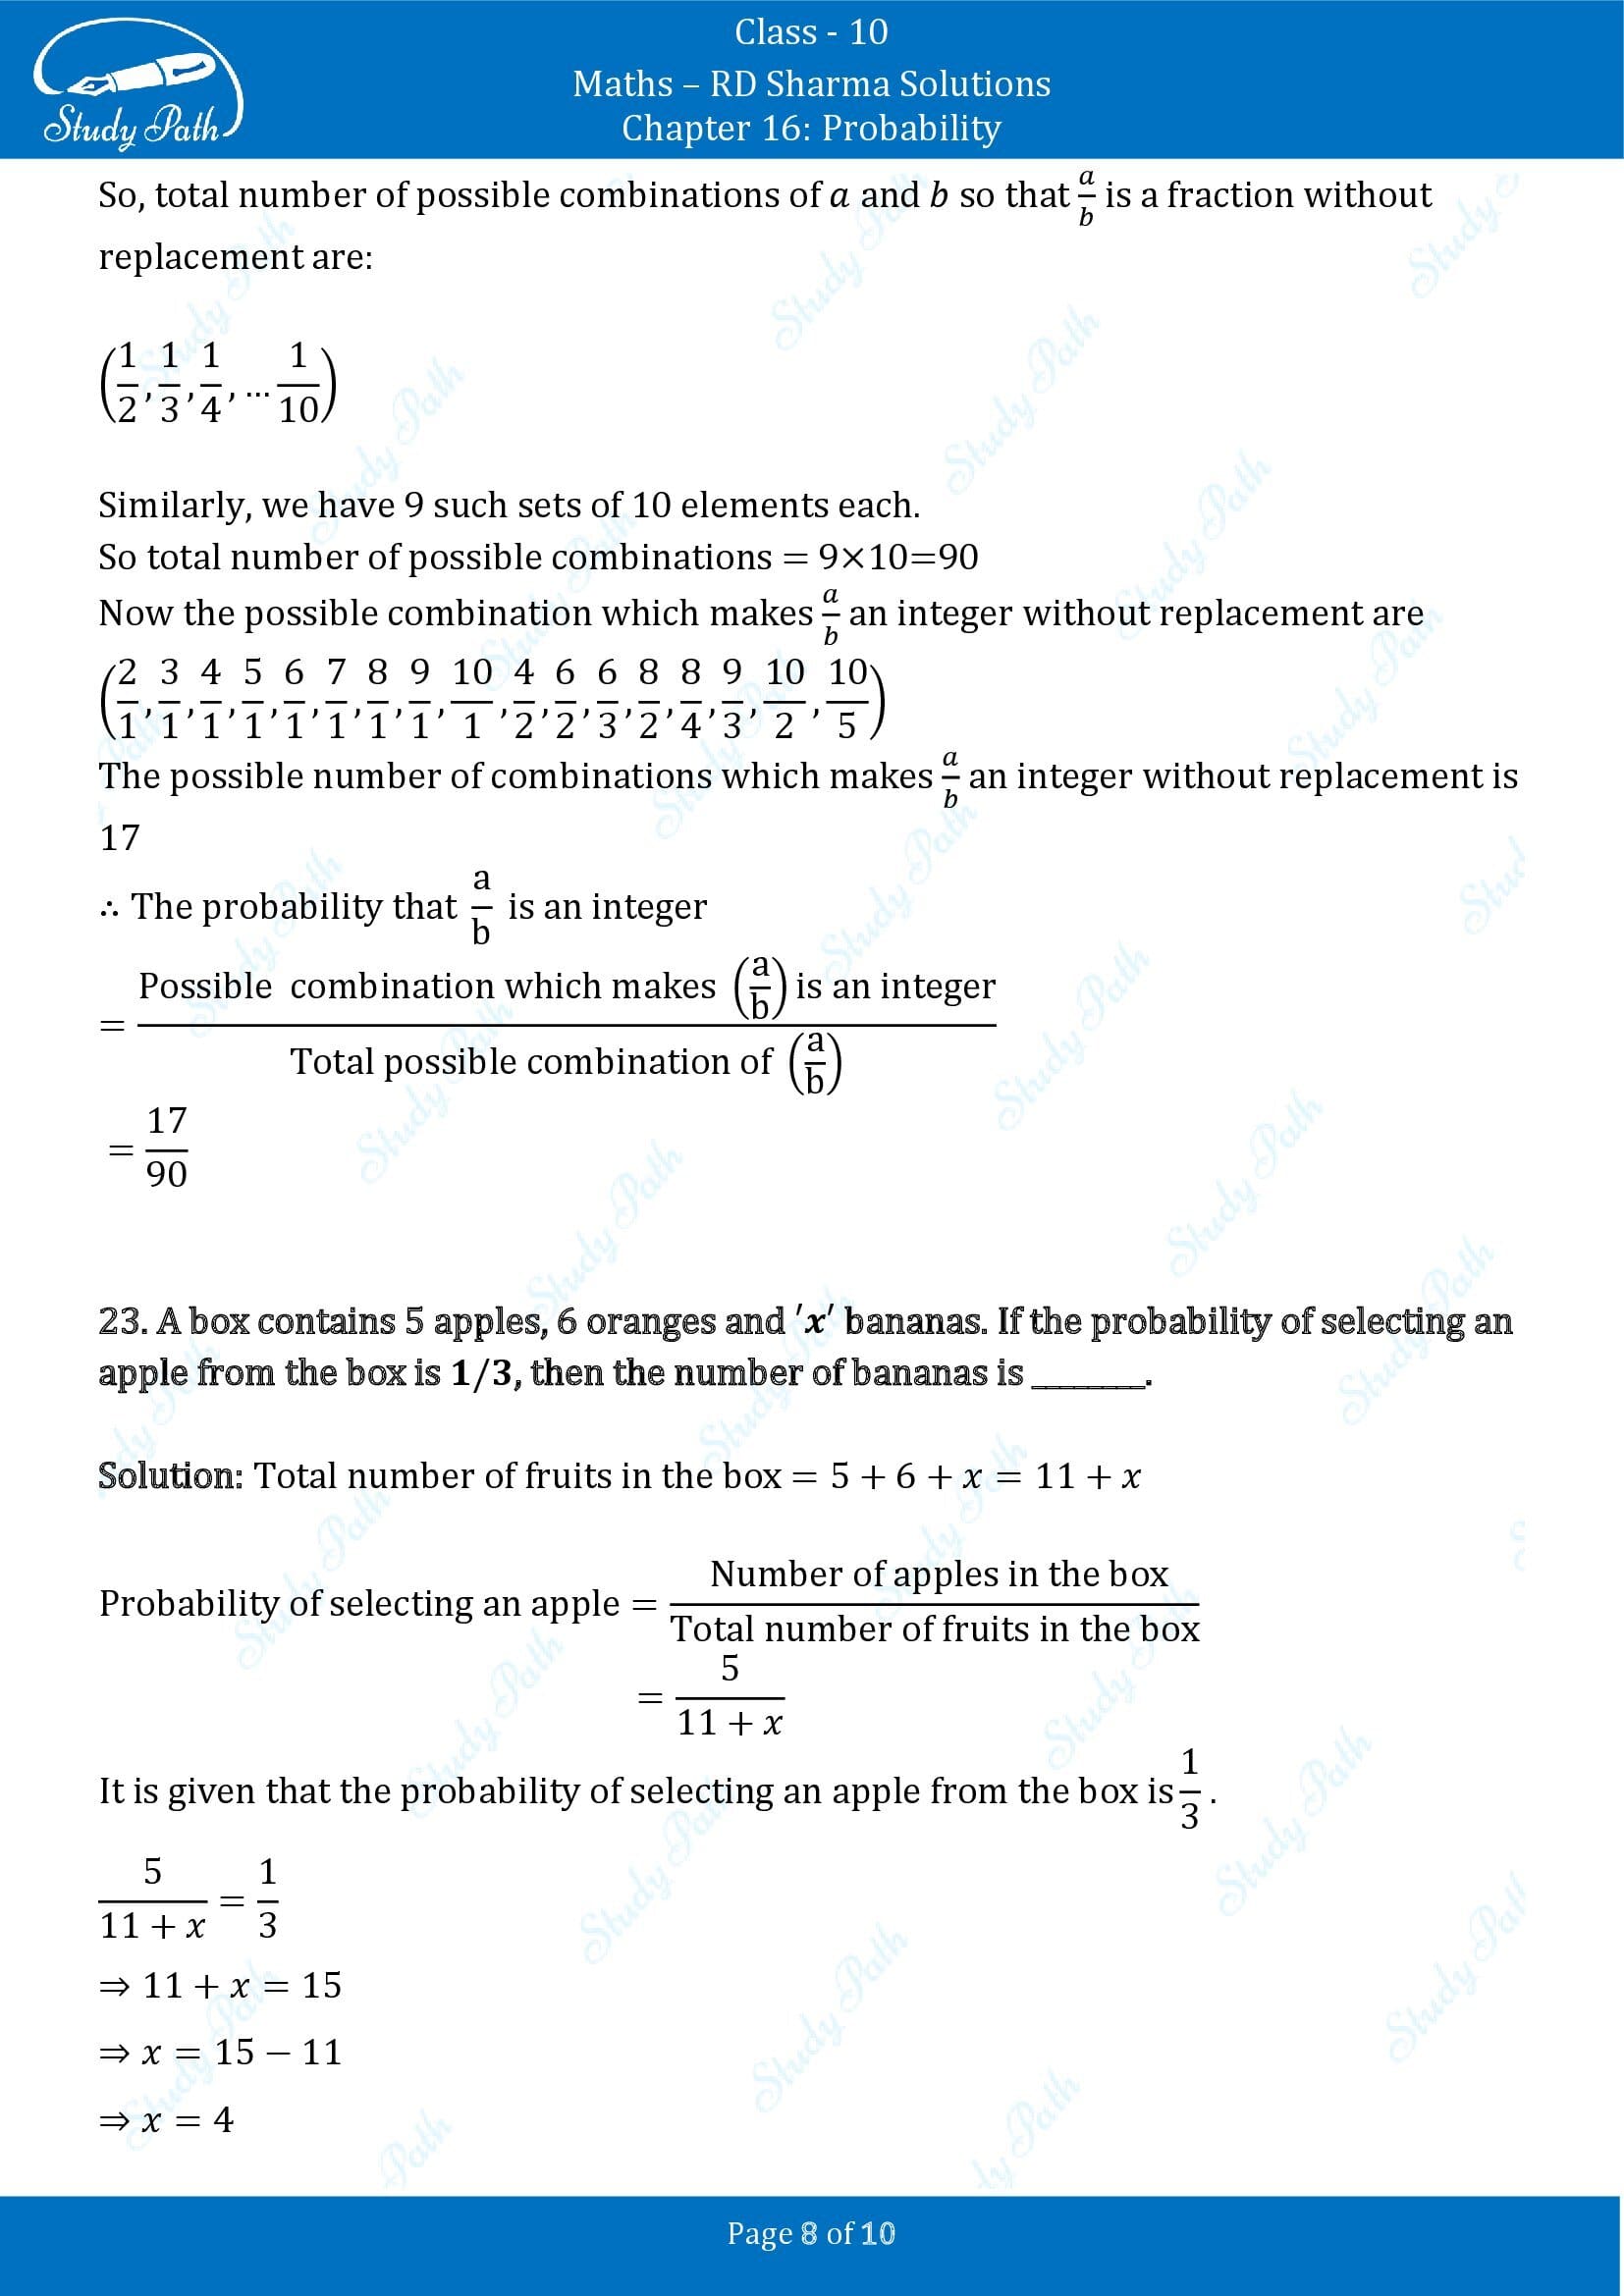 RD Sharma Solutions Class 10 Chapter 16 Probability Fill in the Blank Type Questions FBQs 00008